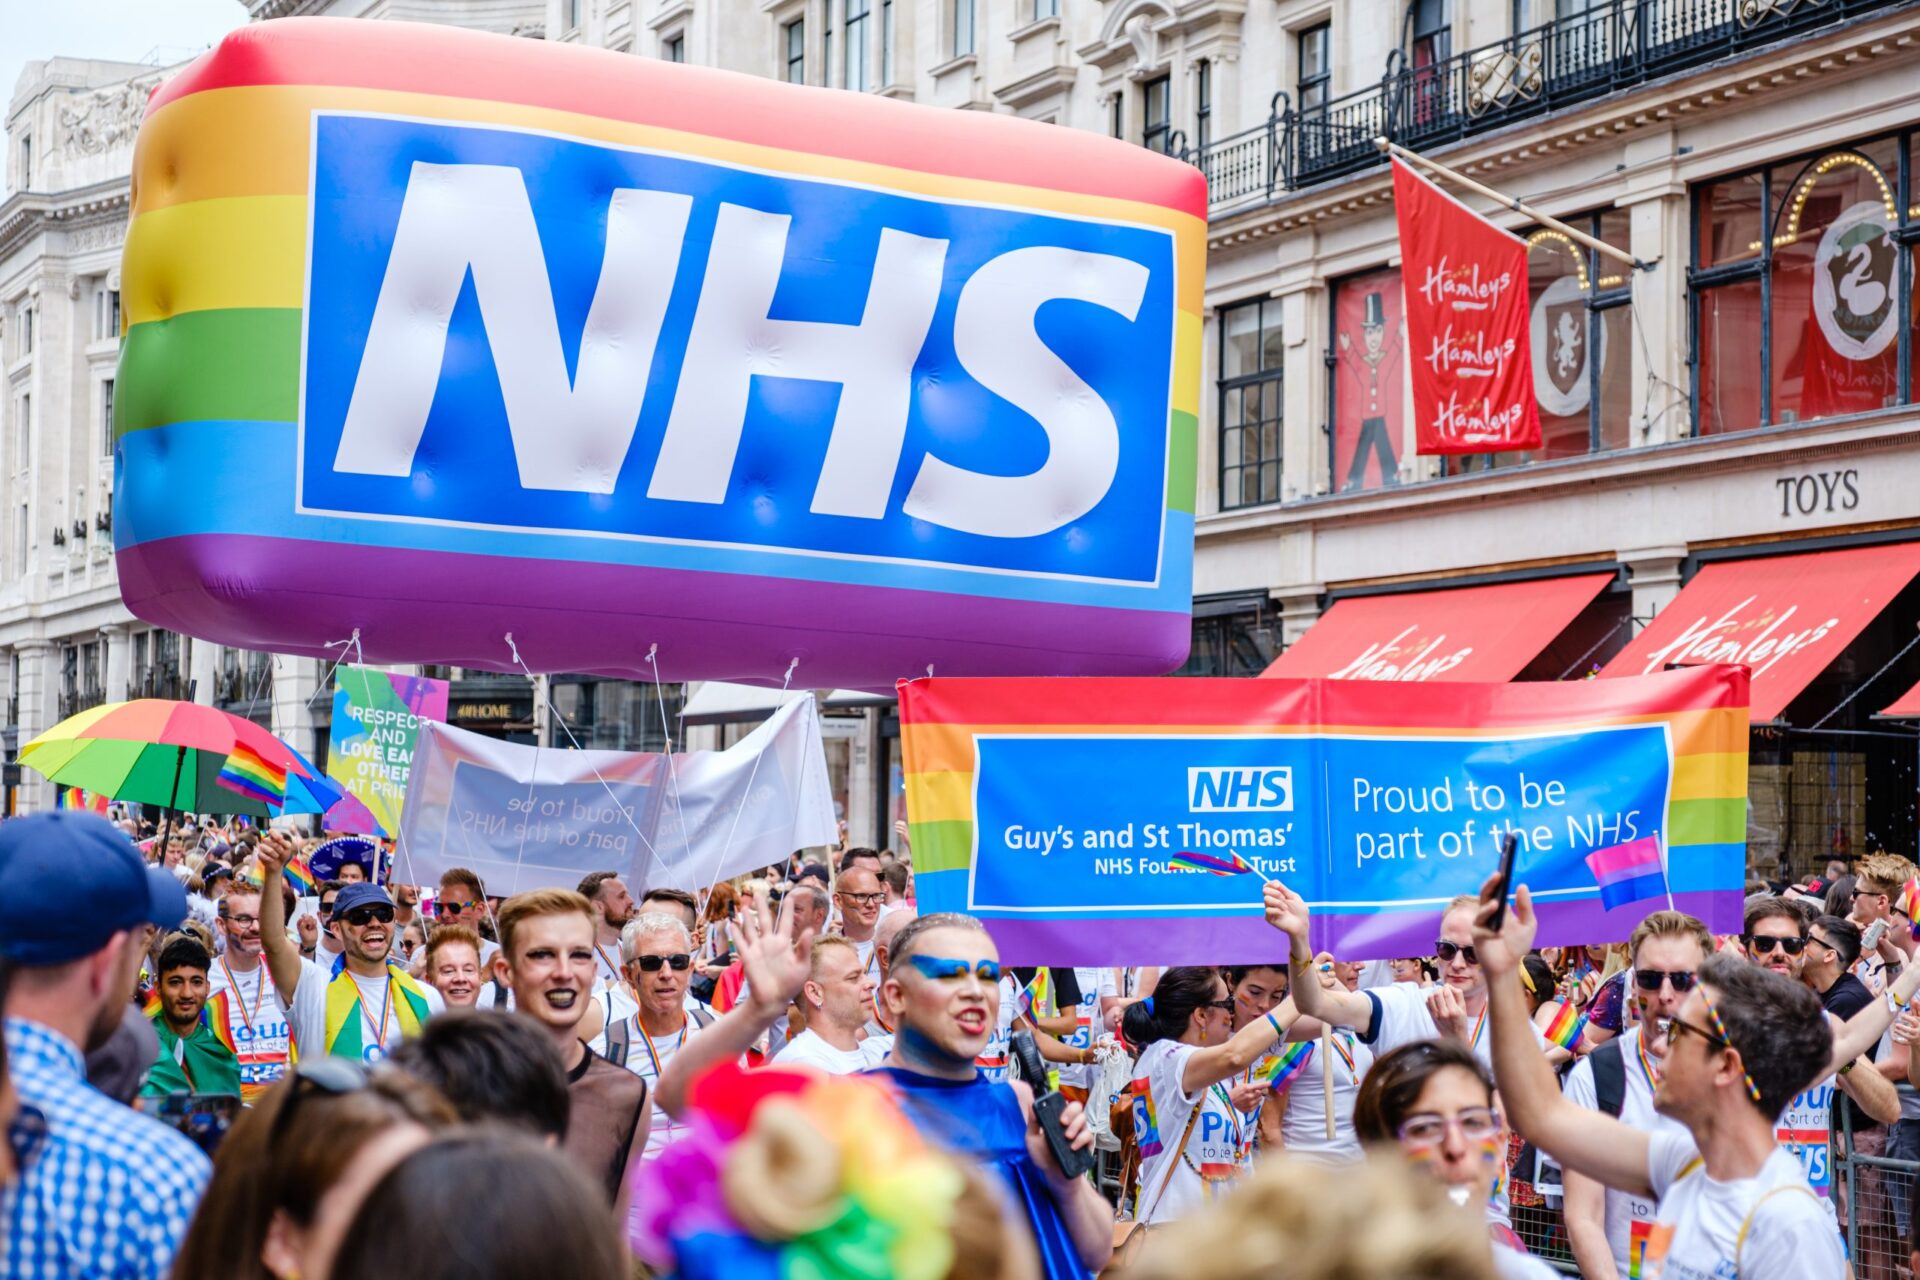 Photo of a multi-coloured balloon with the NHS logo on it, in a large crowd of people